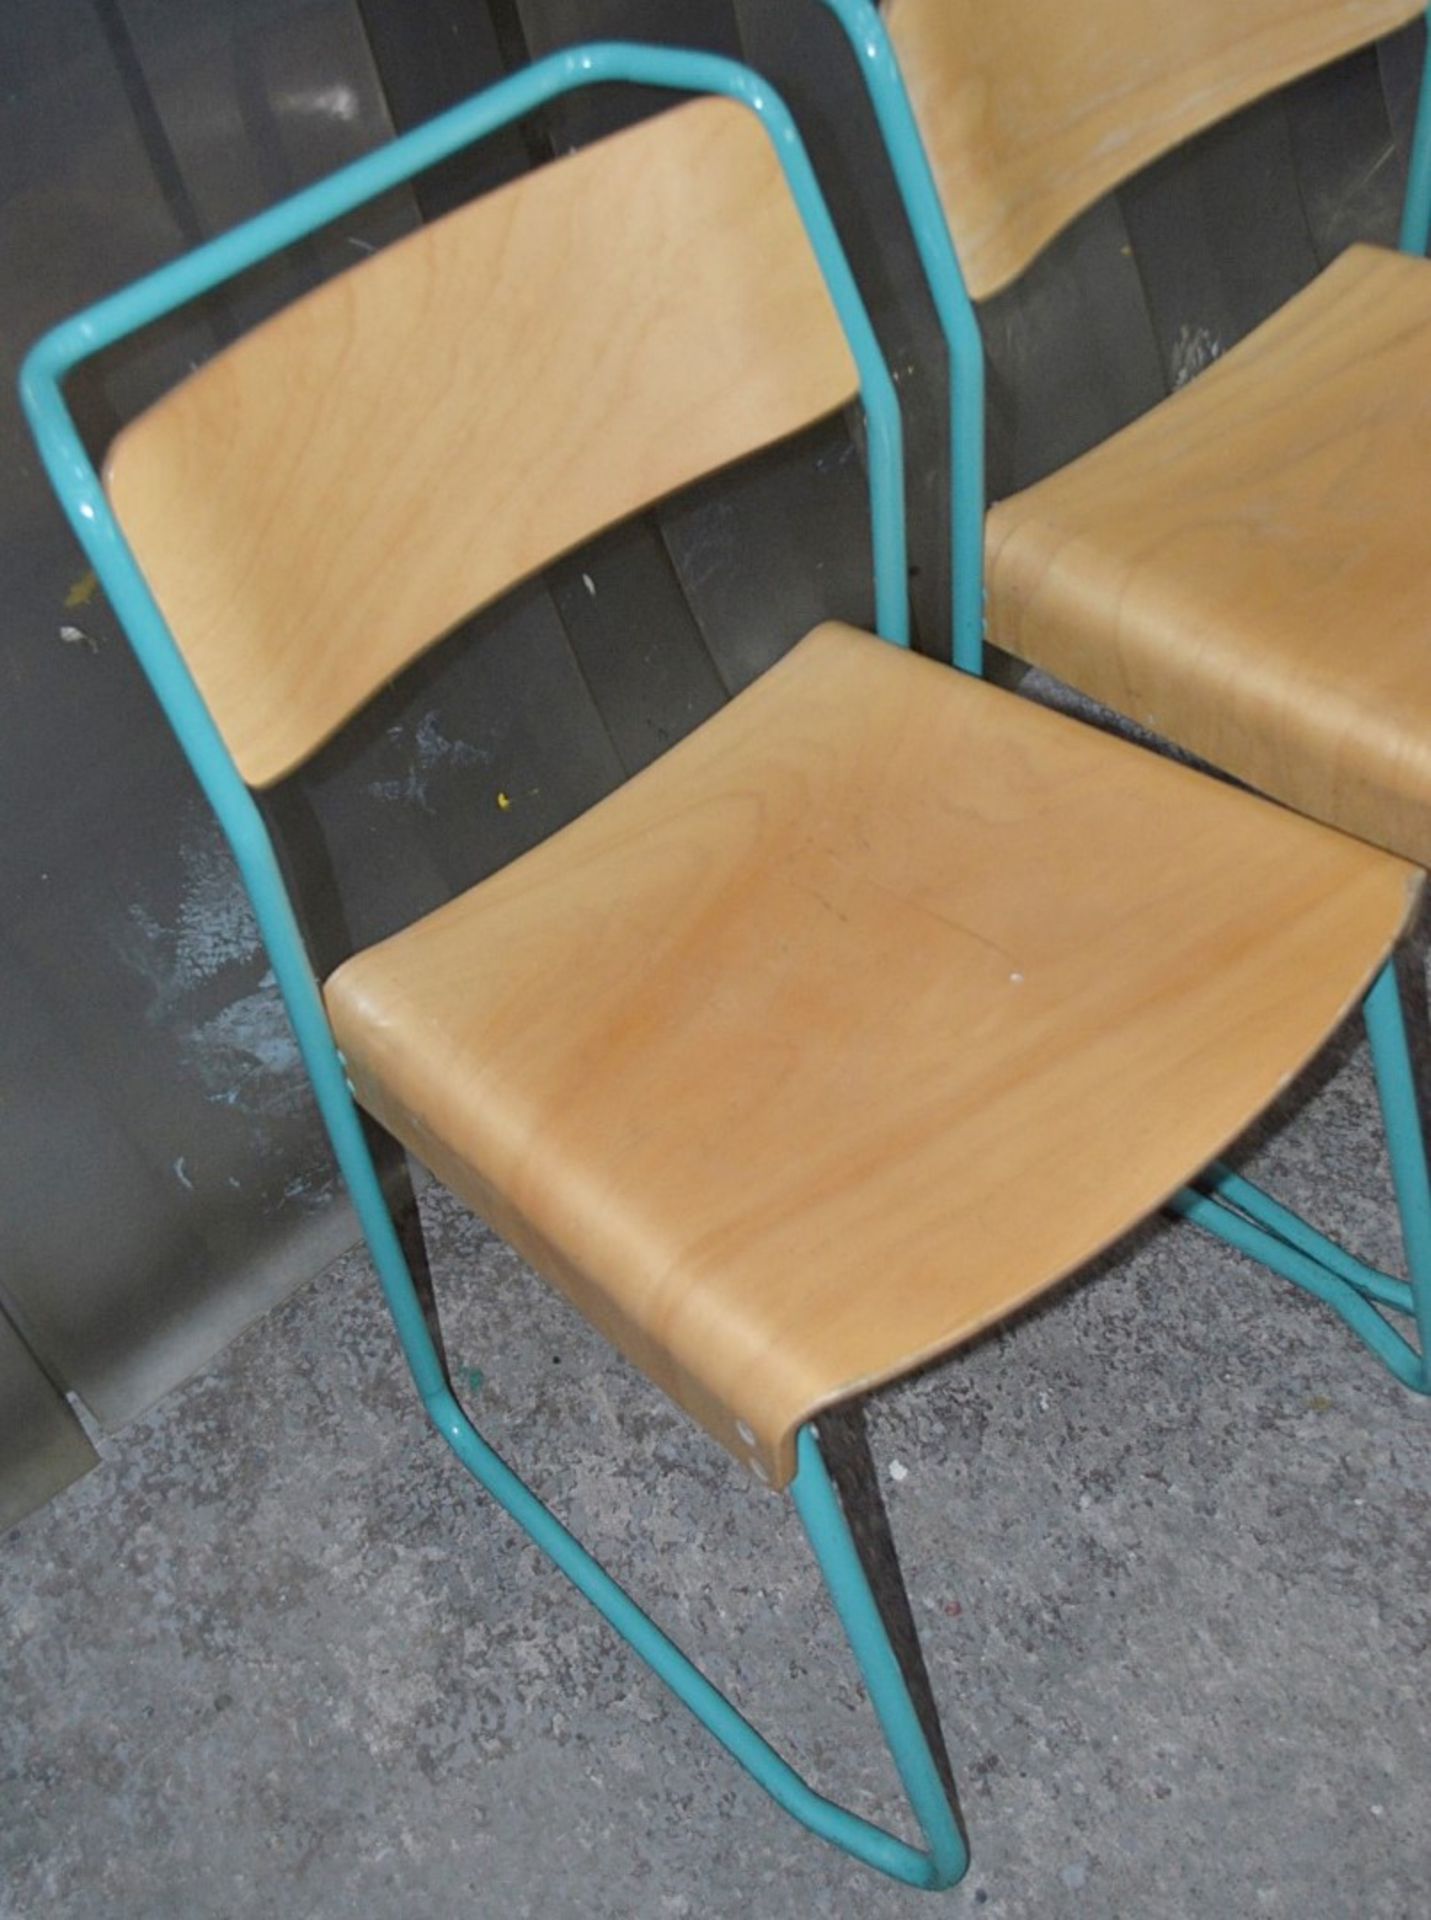 12 x Contemporary Stackable Bistro / Bar Chairs With Metal Frames In Teal With Curved Vanished - Image 5 of 11